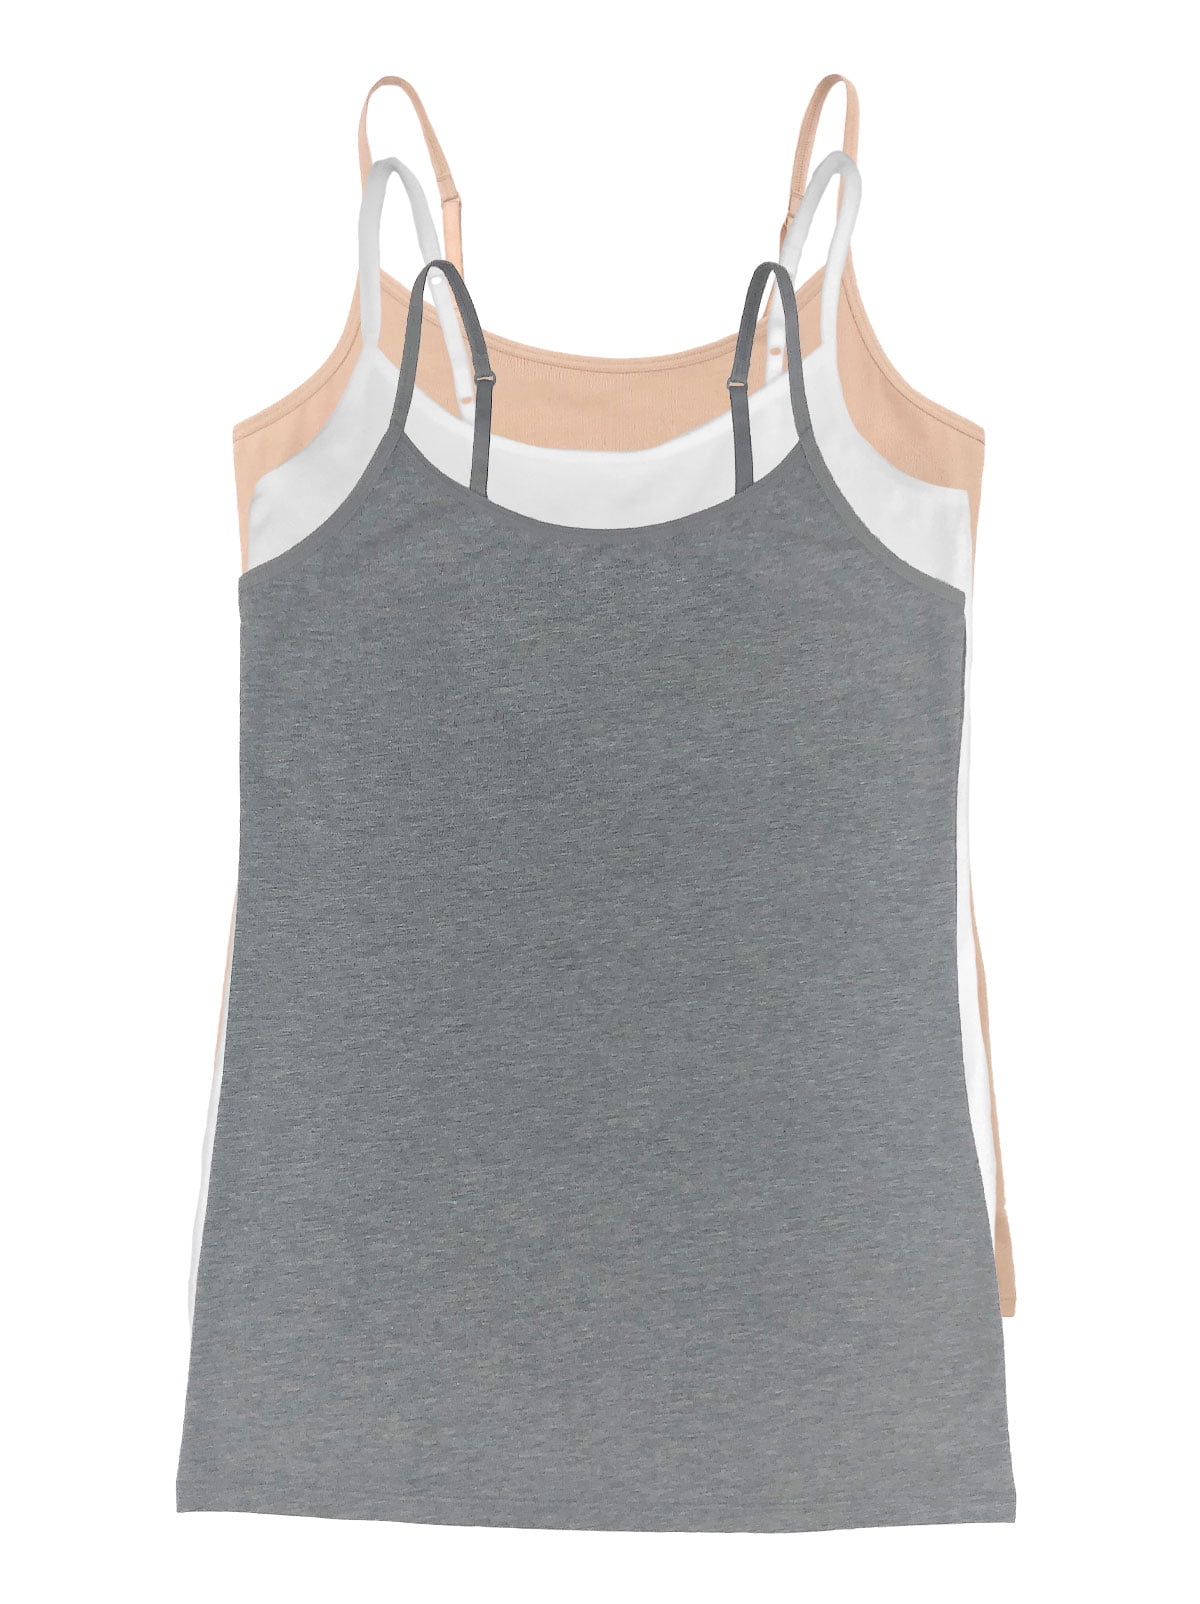 Buy Chic Basic Camisole in Grey - Modal Online India, Best Prices